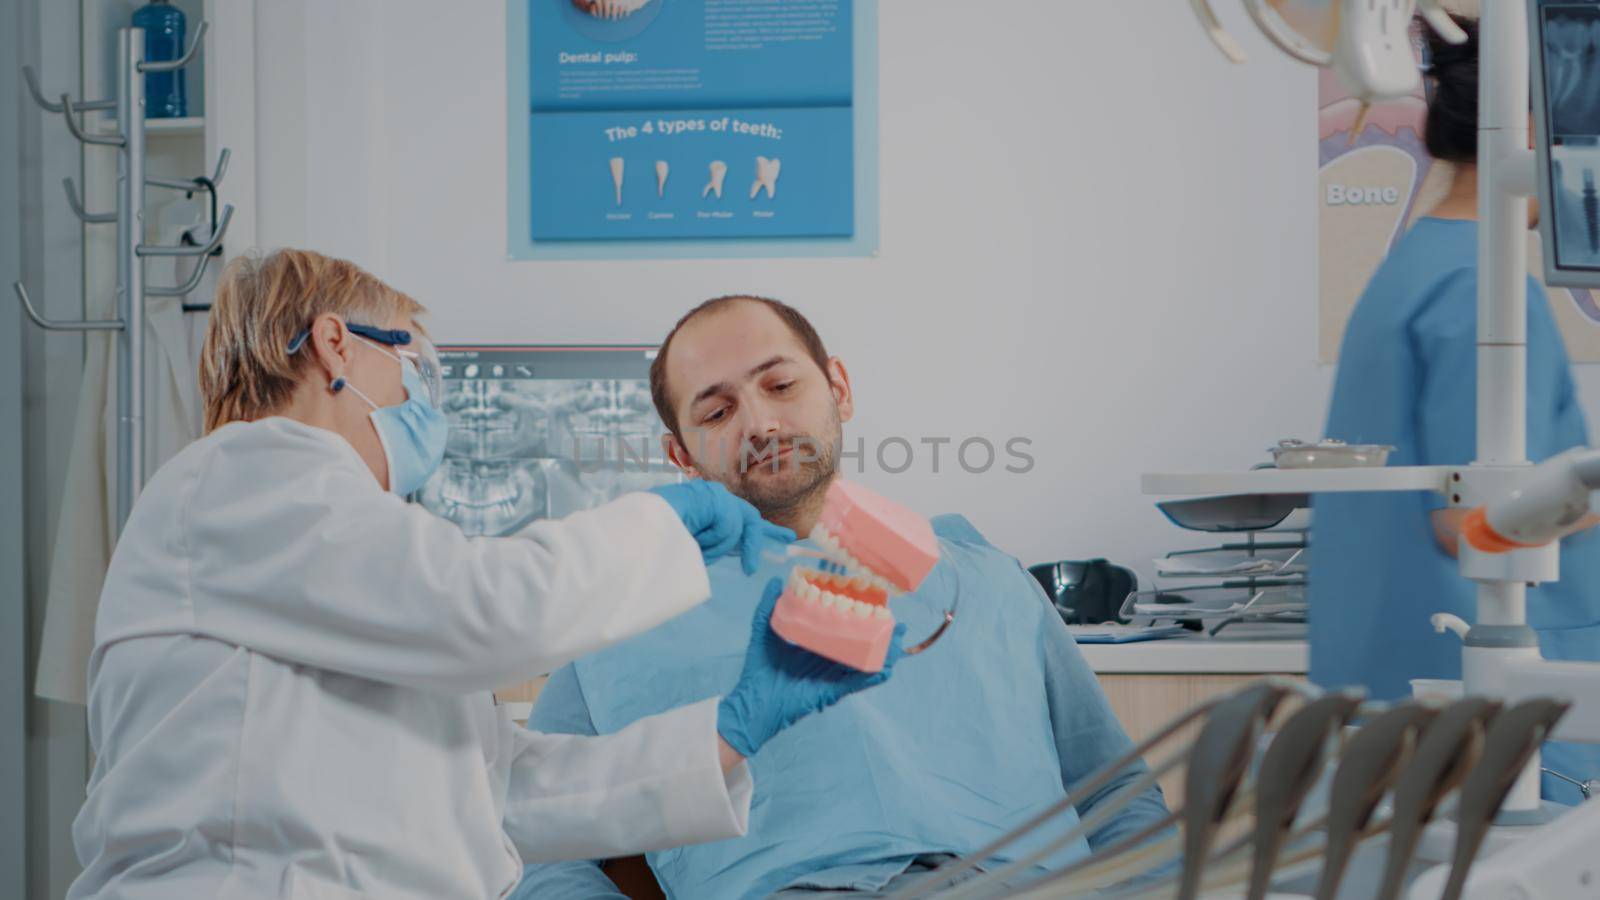 Stomatologist using artificial jaw to explain correct way to brush teeth by DCStudio